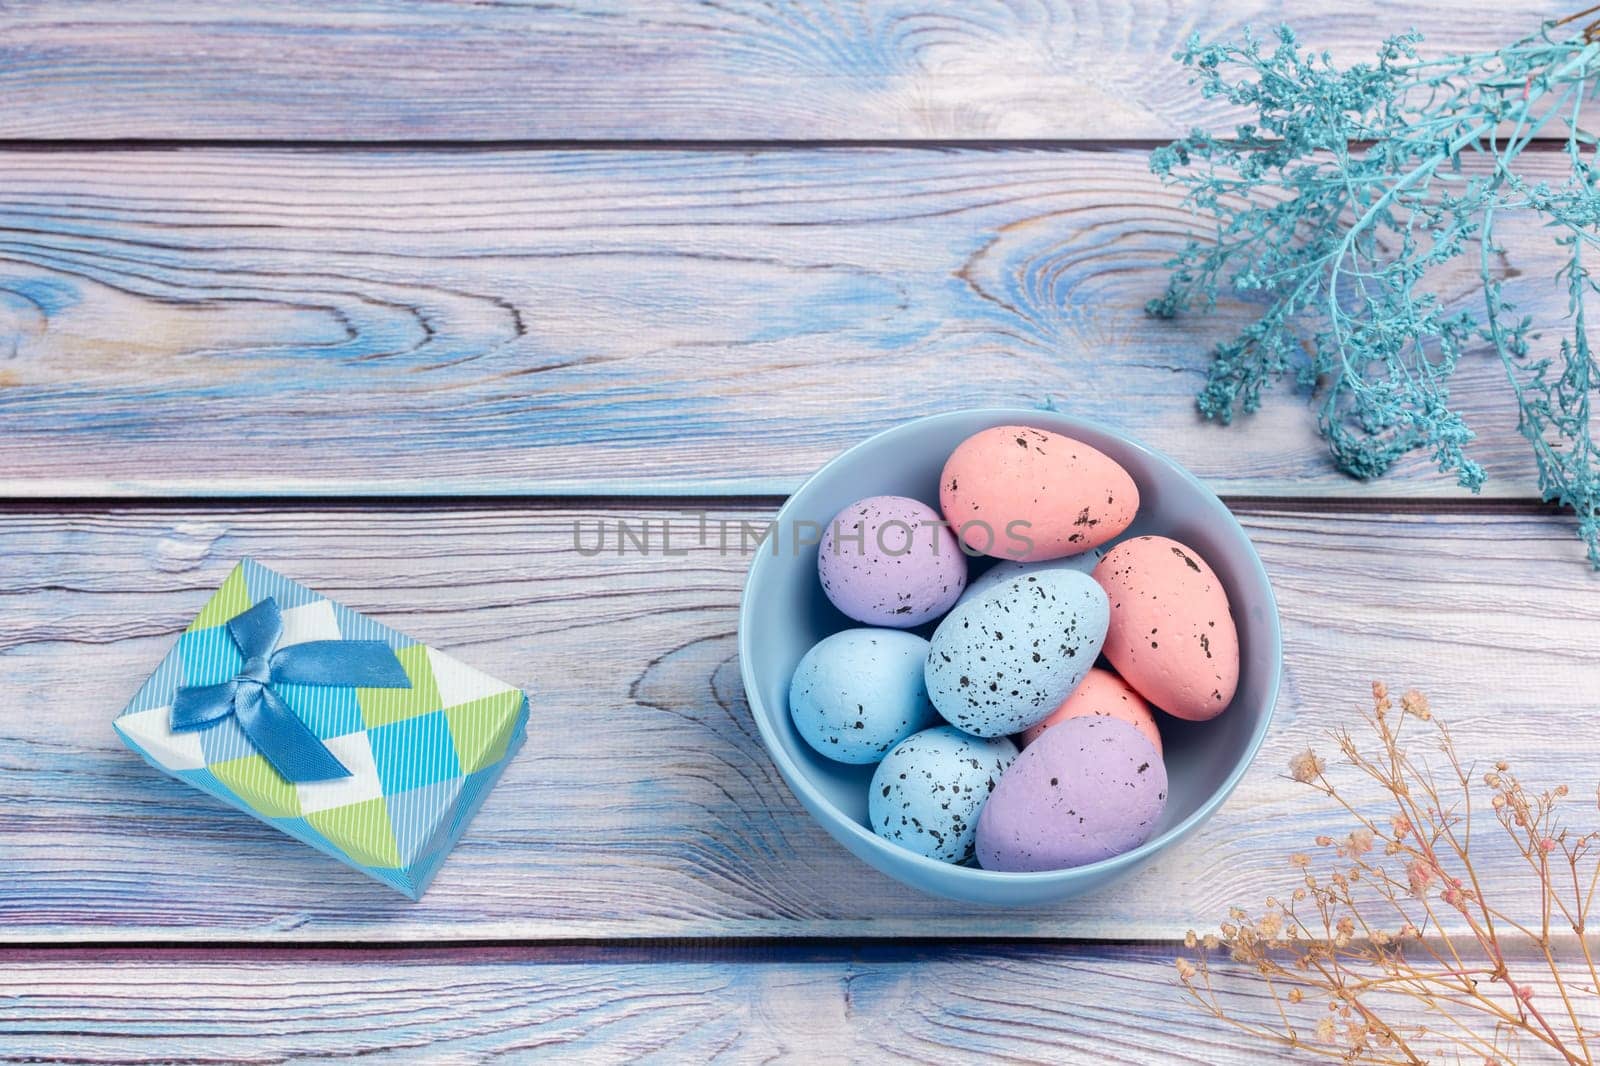 Bowl with colored Easter eggs and a gift box on the wooden background. by mvg6894